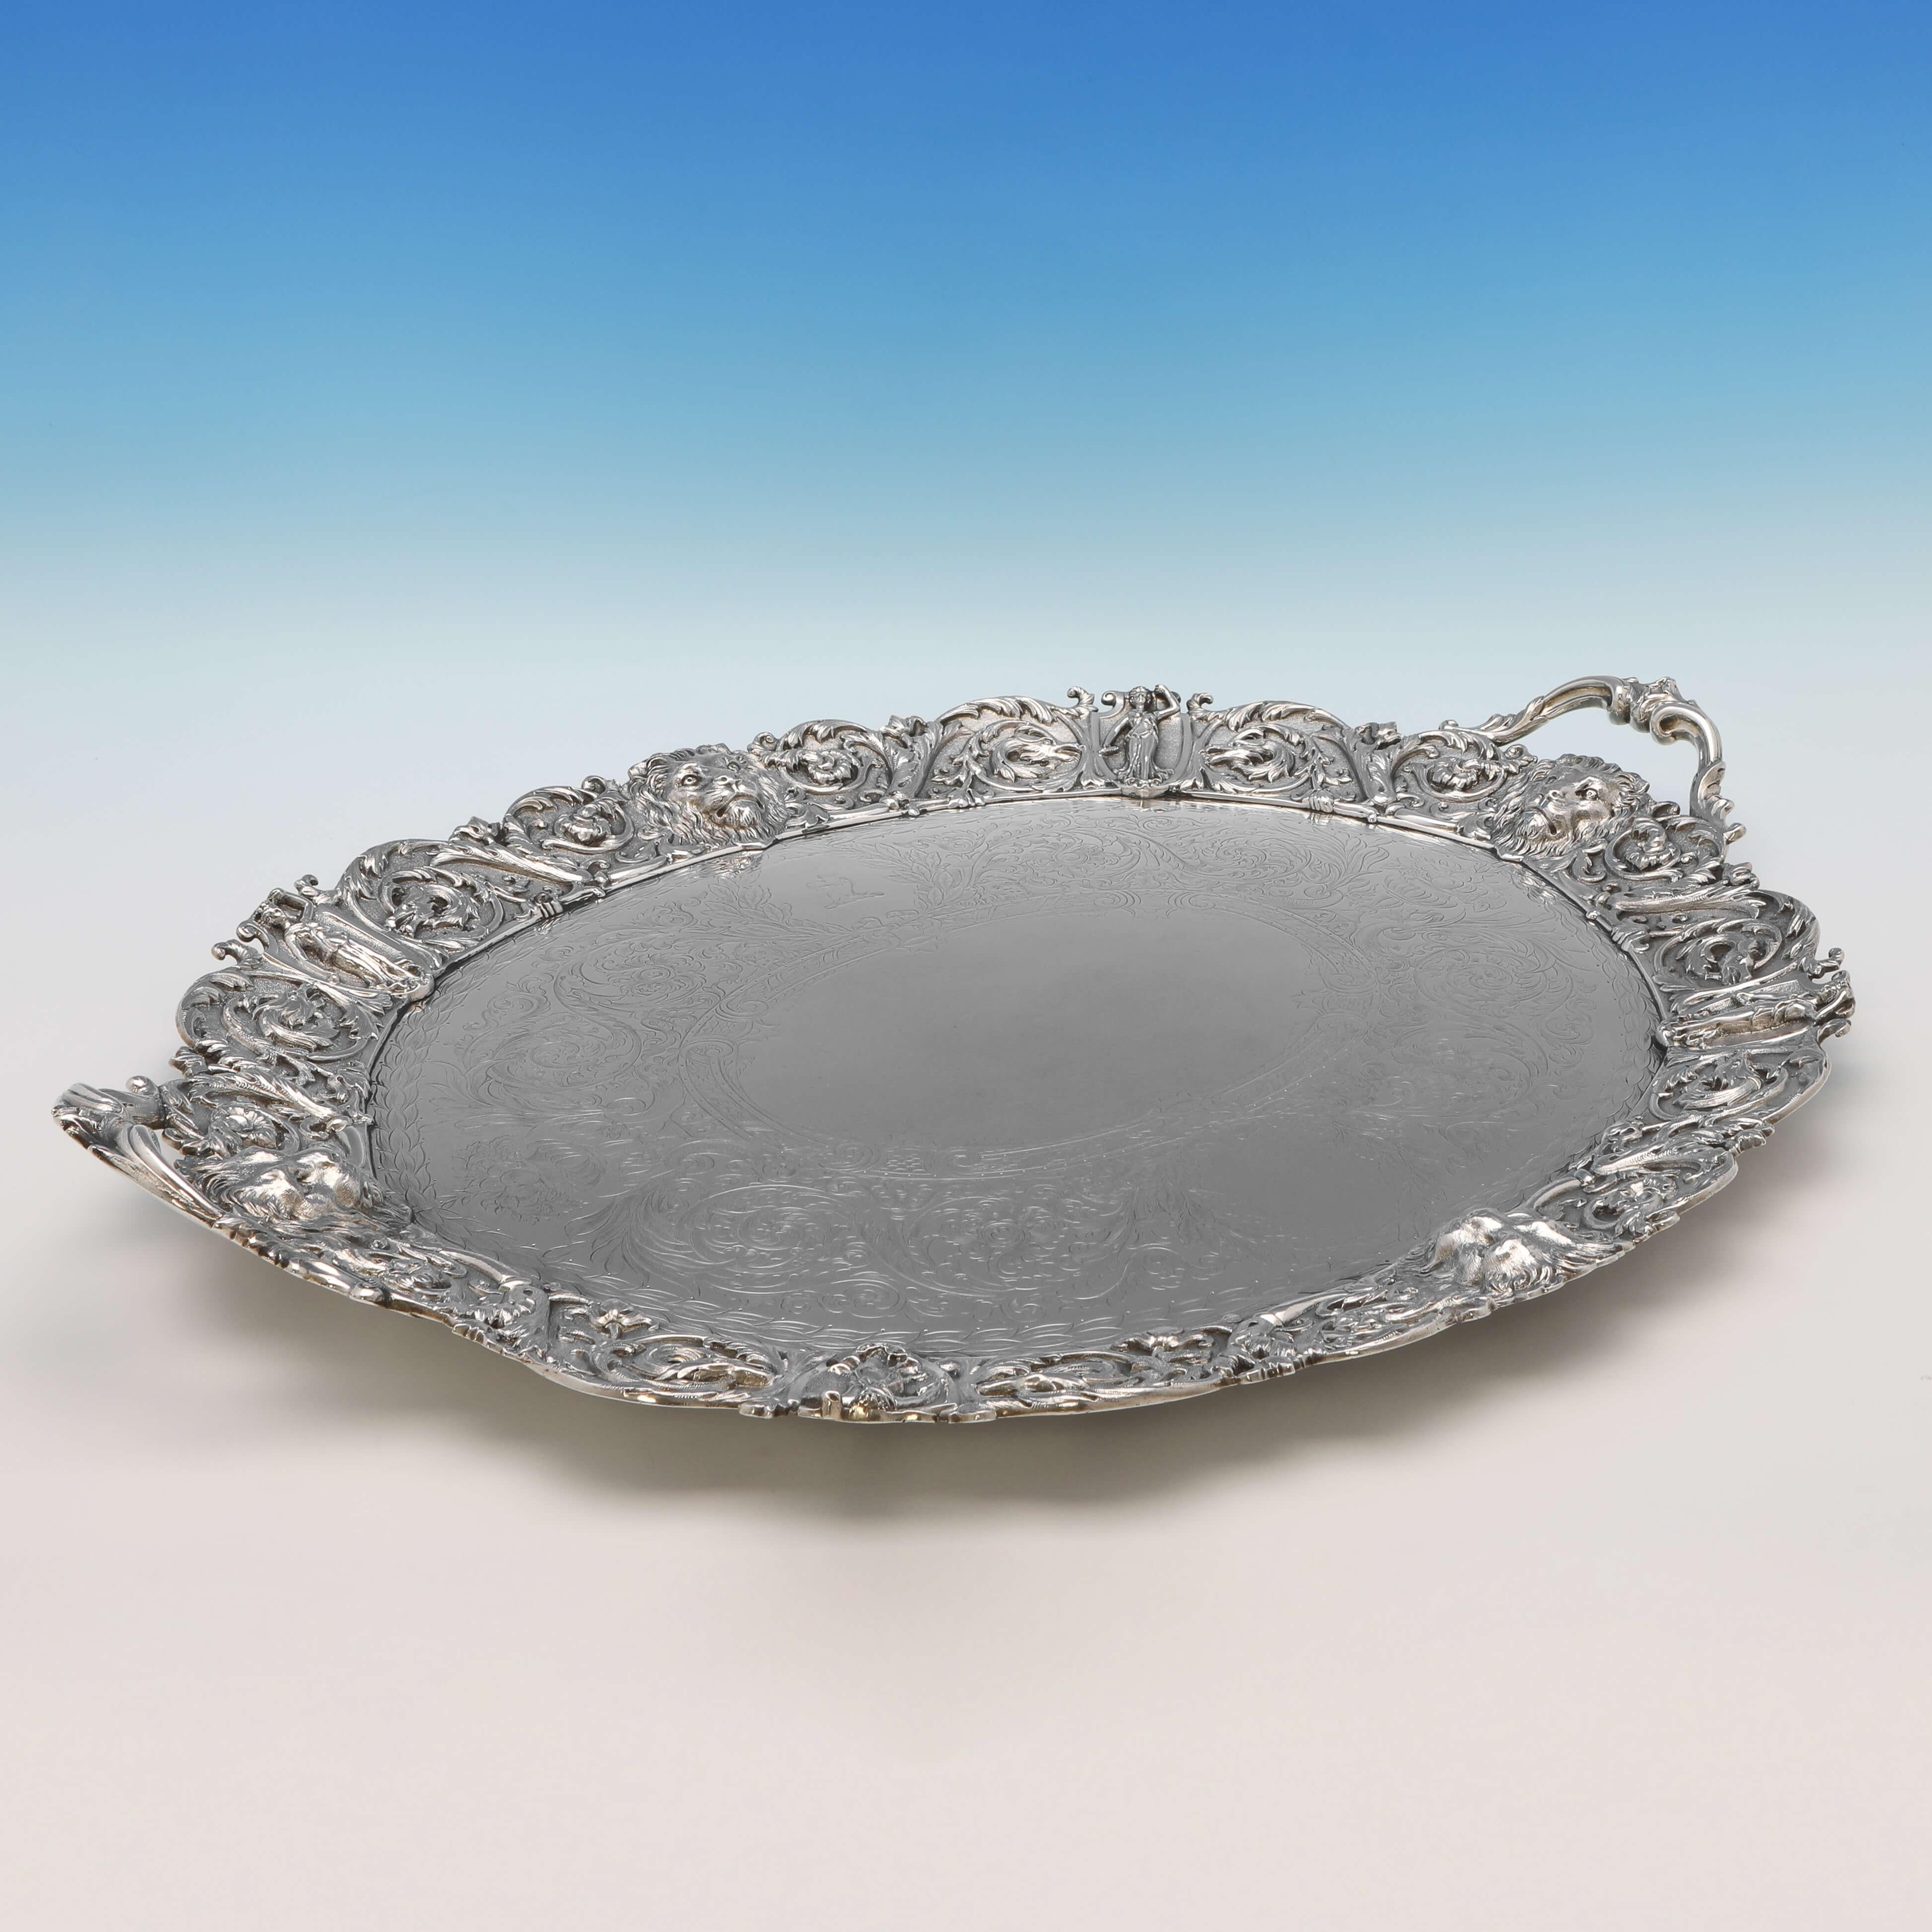 Hallmarked in Edinburgh in 1871 by Mackay & Chisholm, this wonderful, Victorian, Antique Sterling Silver Tray, is Baroque in style, featuring engraved decoration to the centre with acanthus leaves and lions, an engraved crest, and an incredible cast